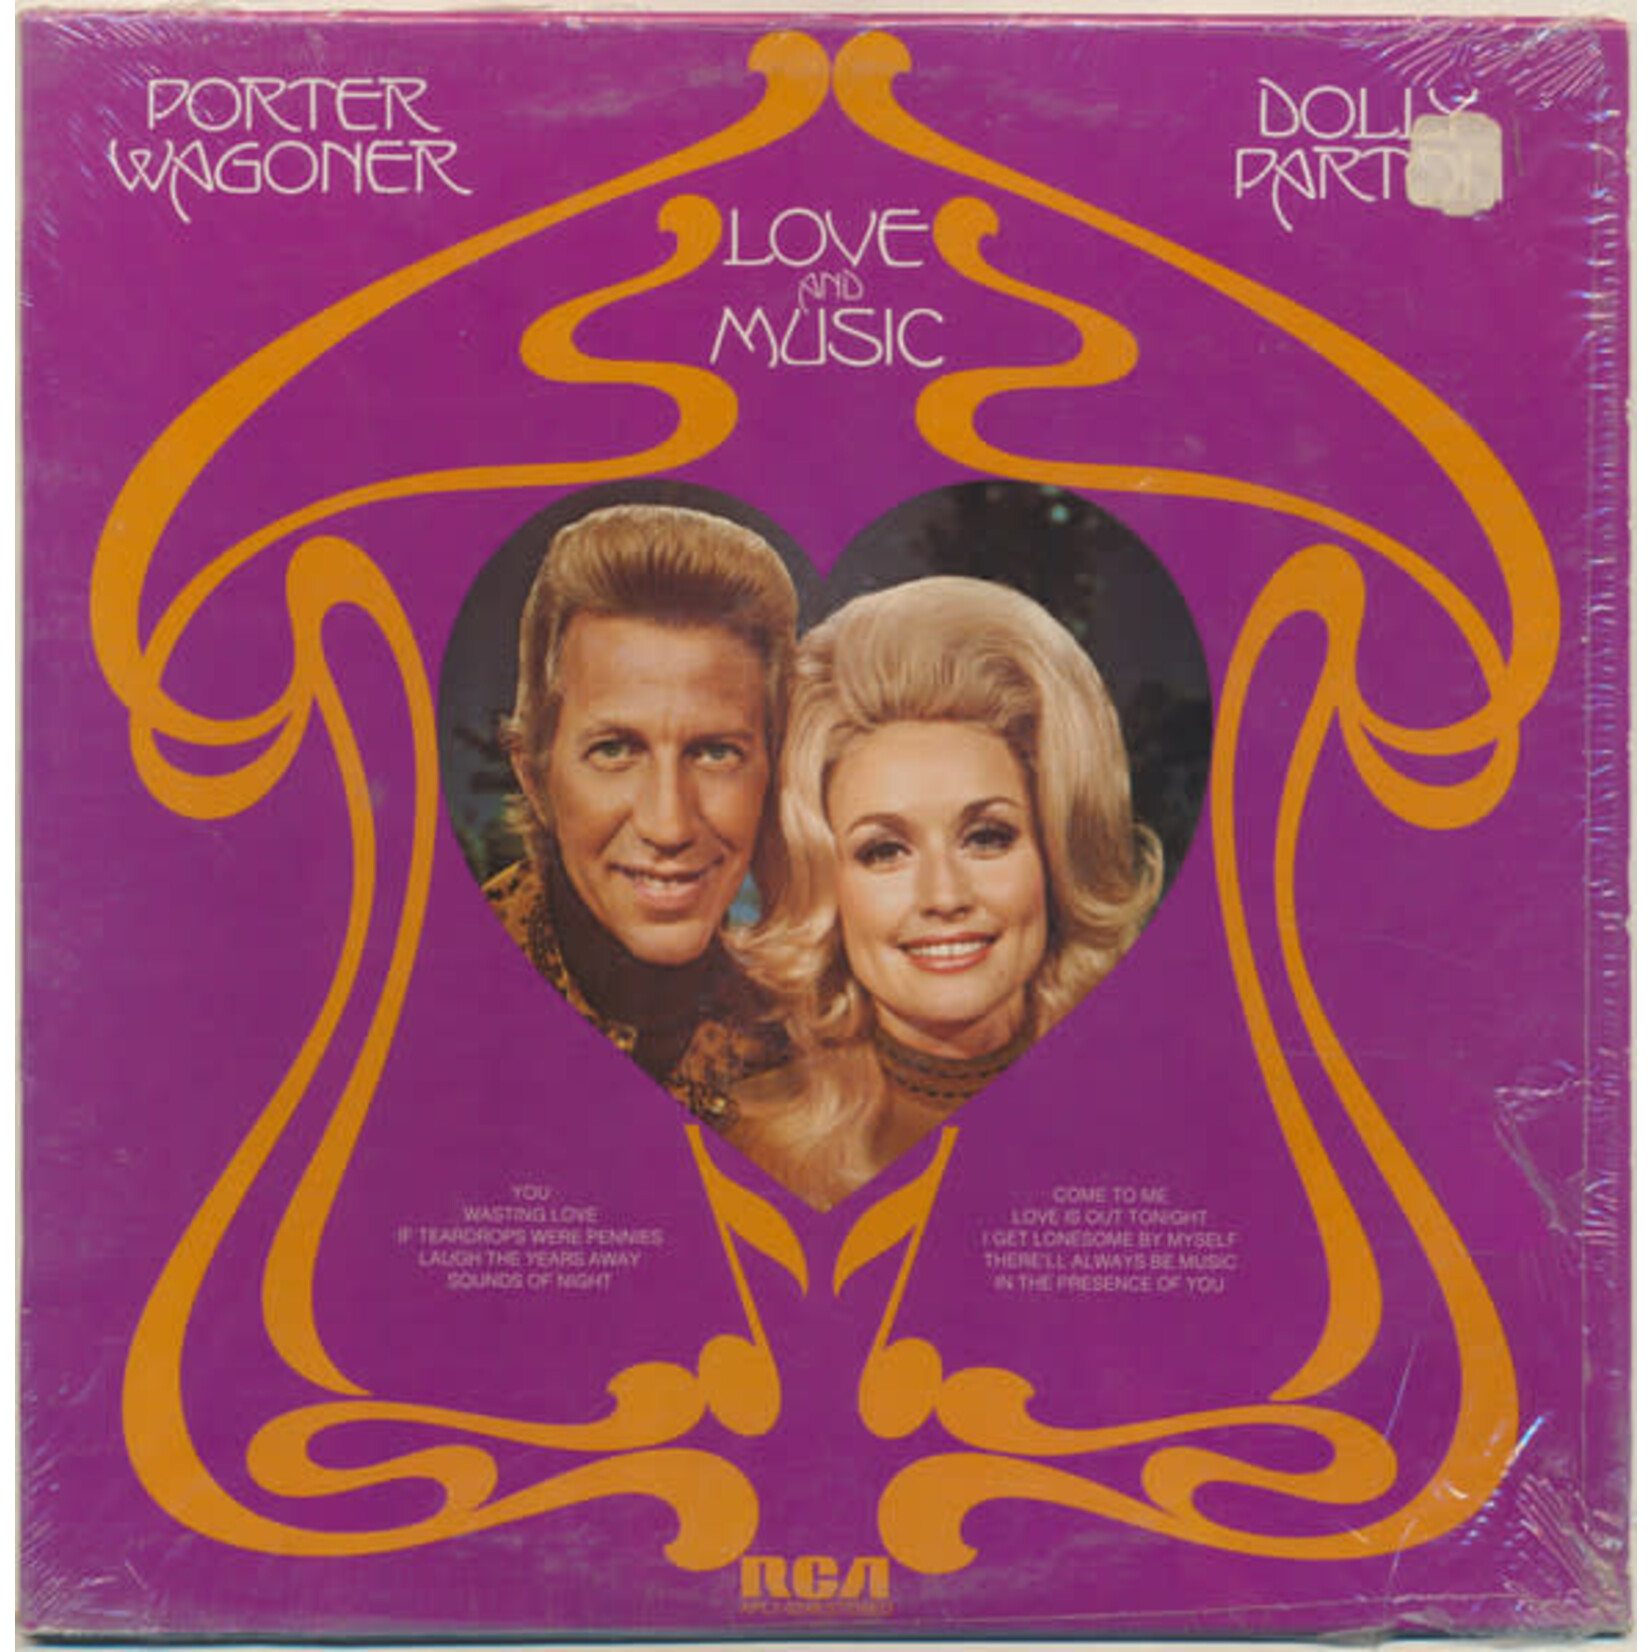 Porter Wagoner And Dolly Parton – Love And Music (VG, 1973, LP, RCA Victor – APL1-0248)